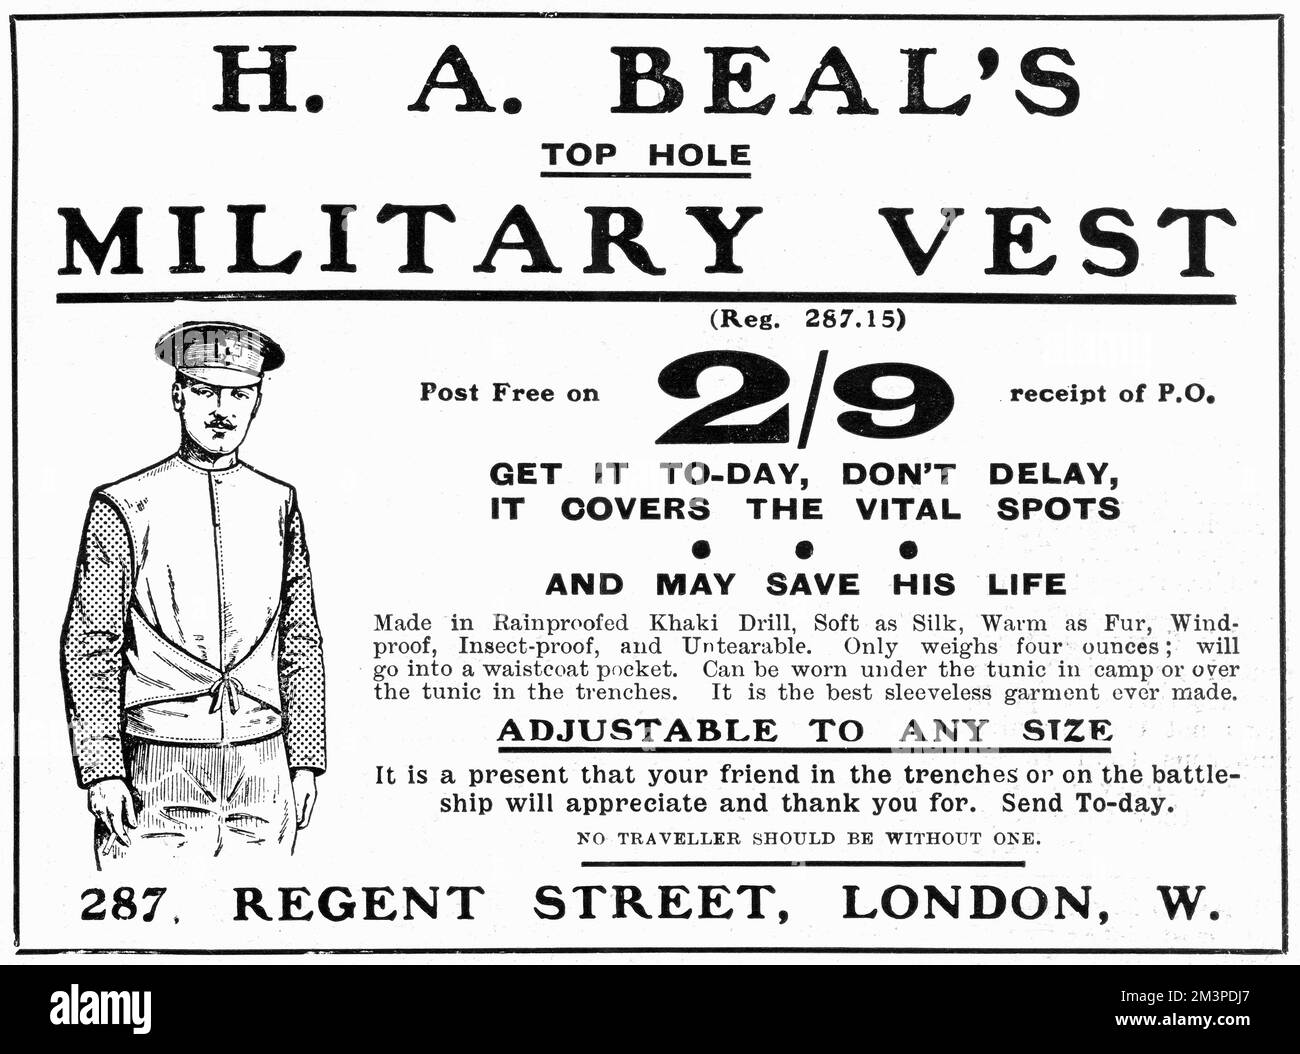 Advertisement for a 'top hole' military vest, 'made in rainproofed khaki drill, soft as silk, warm as fur, windproof, insect-proof, tear proof' and only weighing four ounces.  Adjustable to any size, it 'covers the vital spot and may save his life.'     Date: 1915 Stock Photo